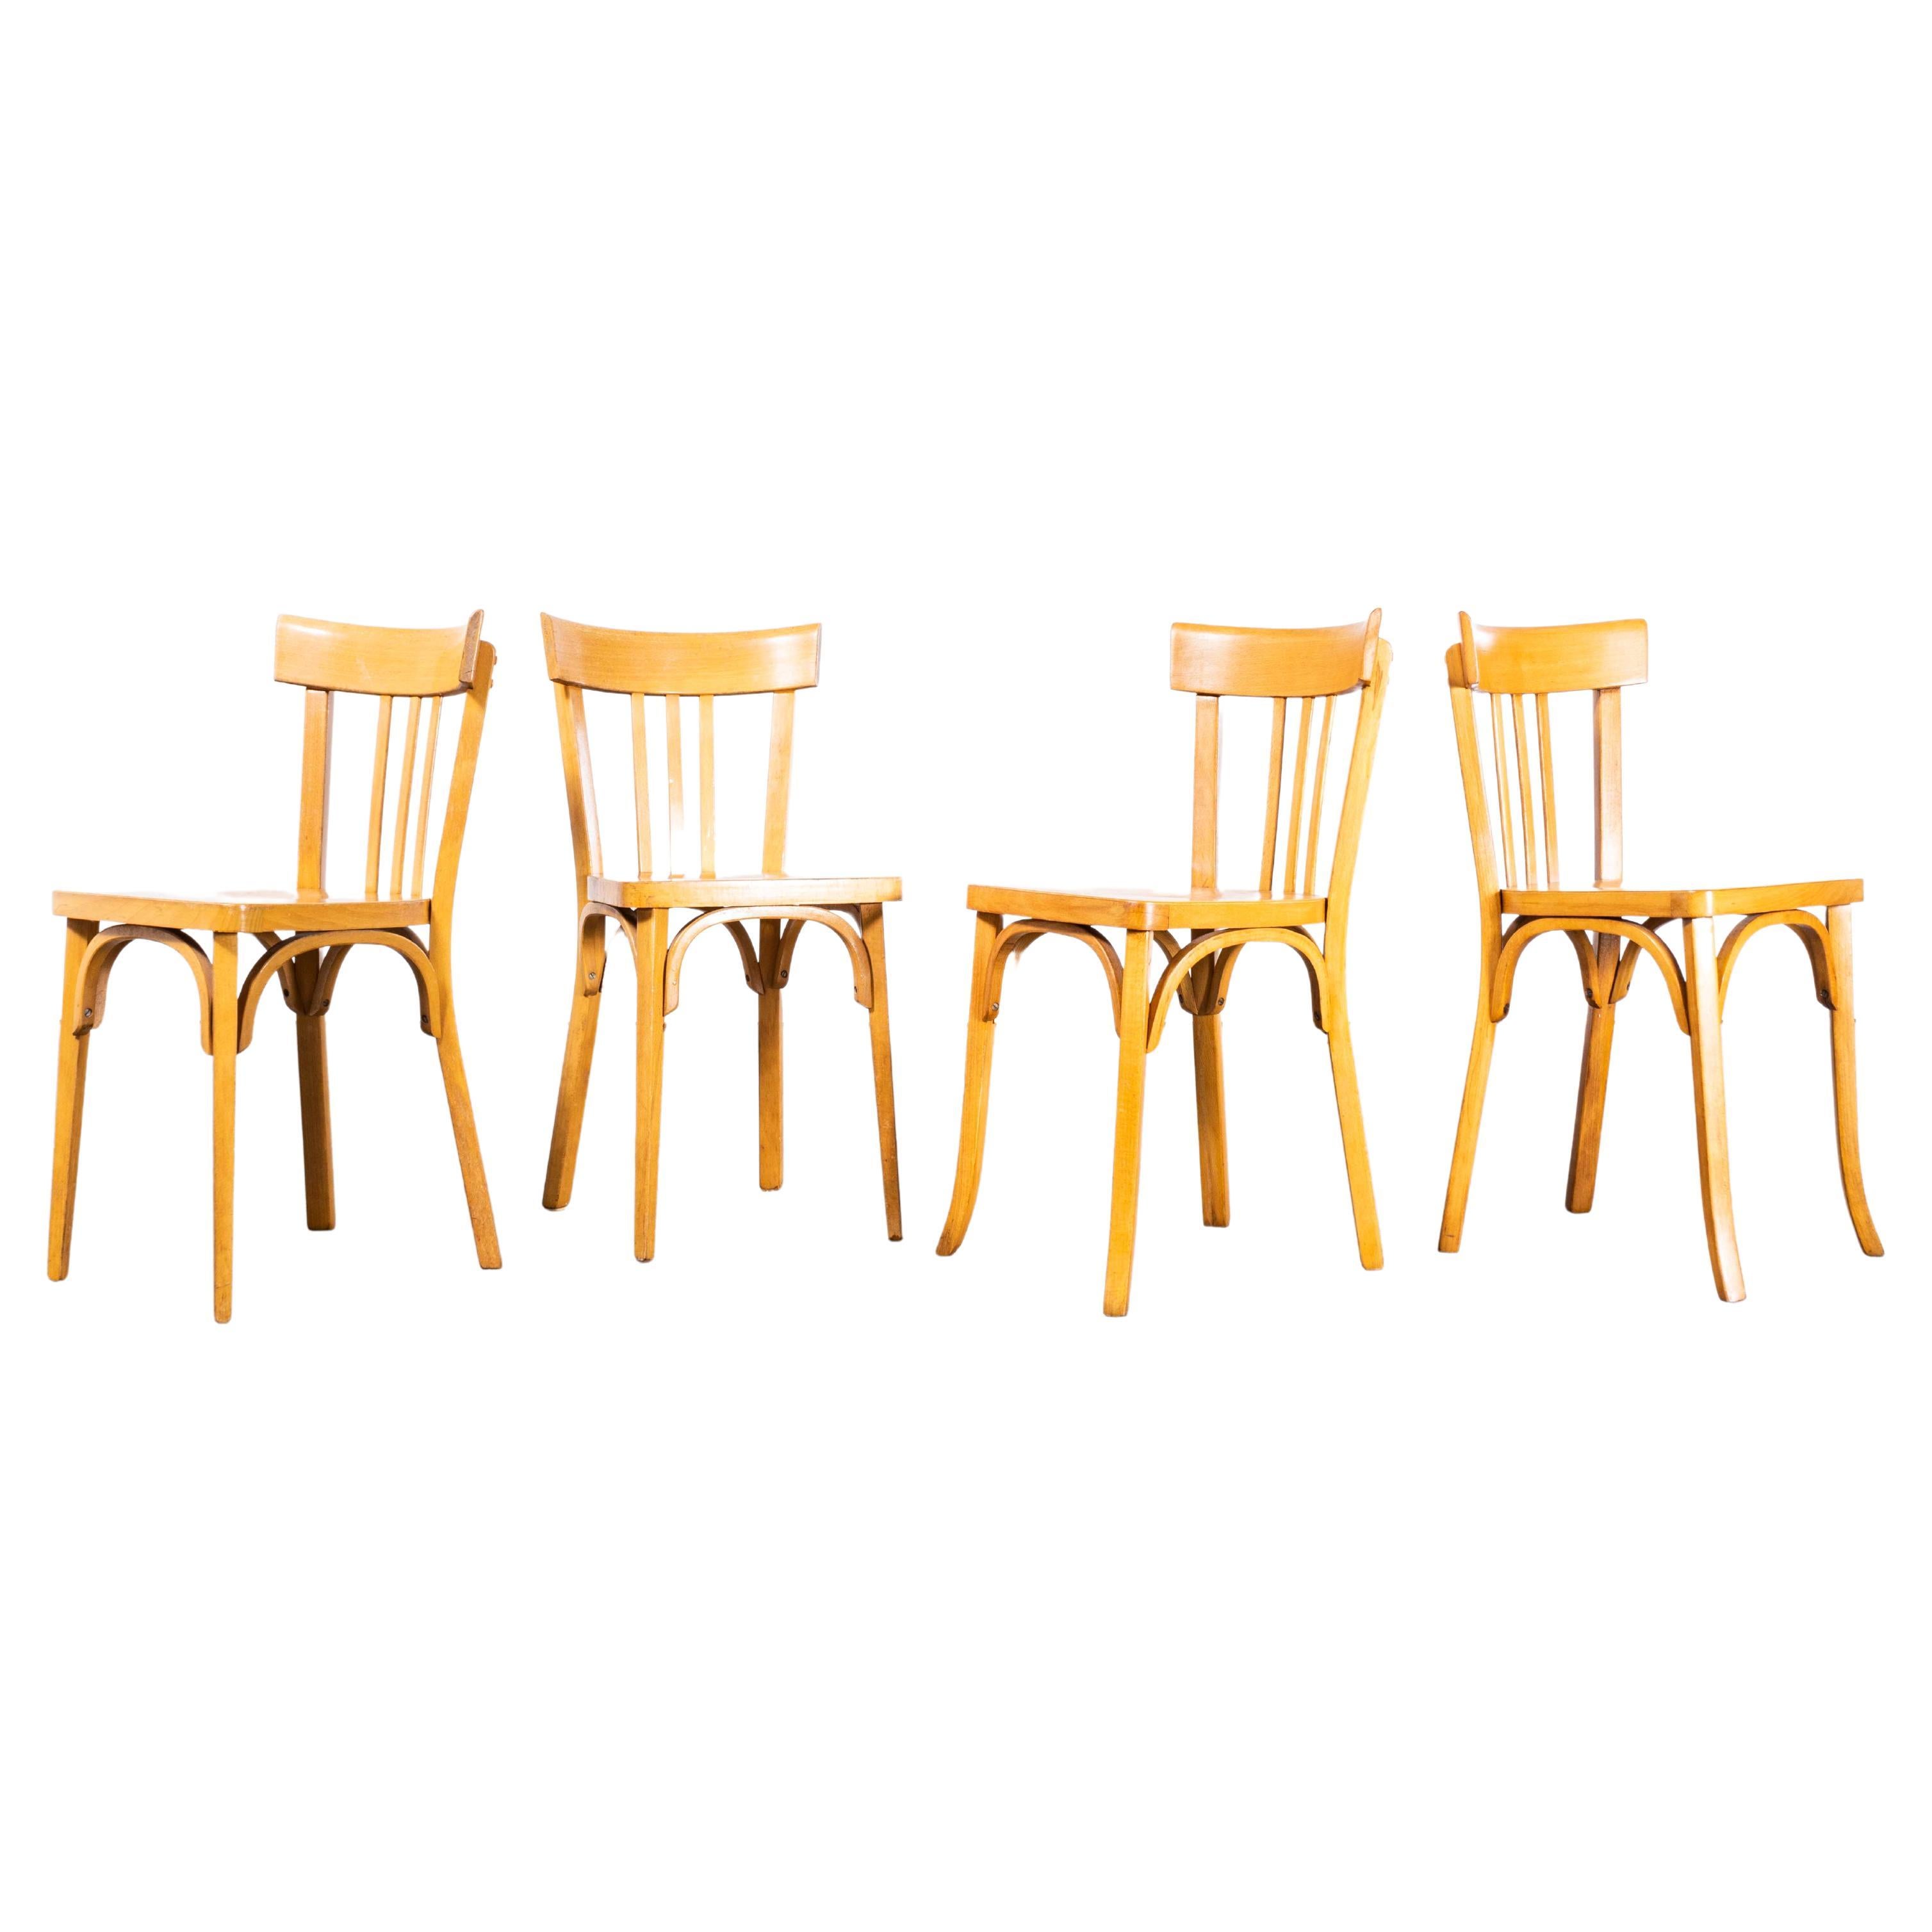 1950s French Baumann Blonde Beech Tri Back Bentwood Dining Chairs - Set of Four